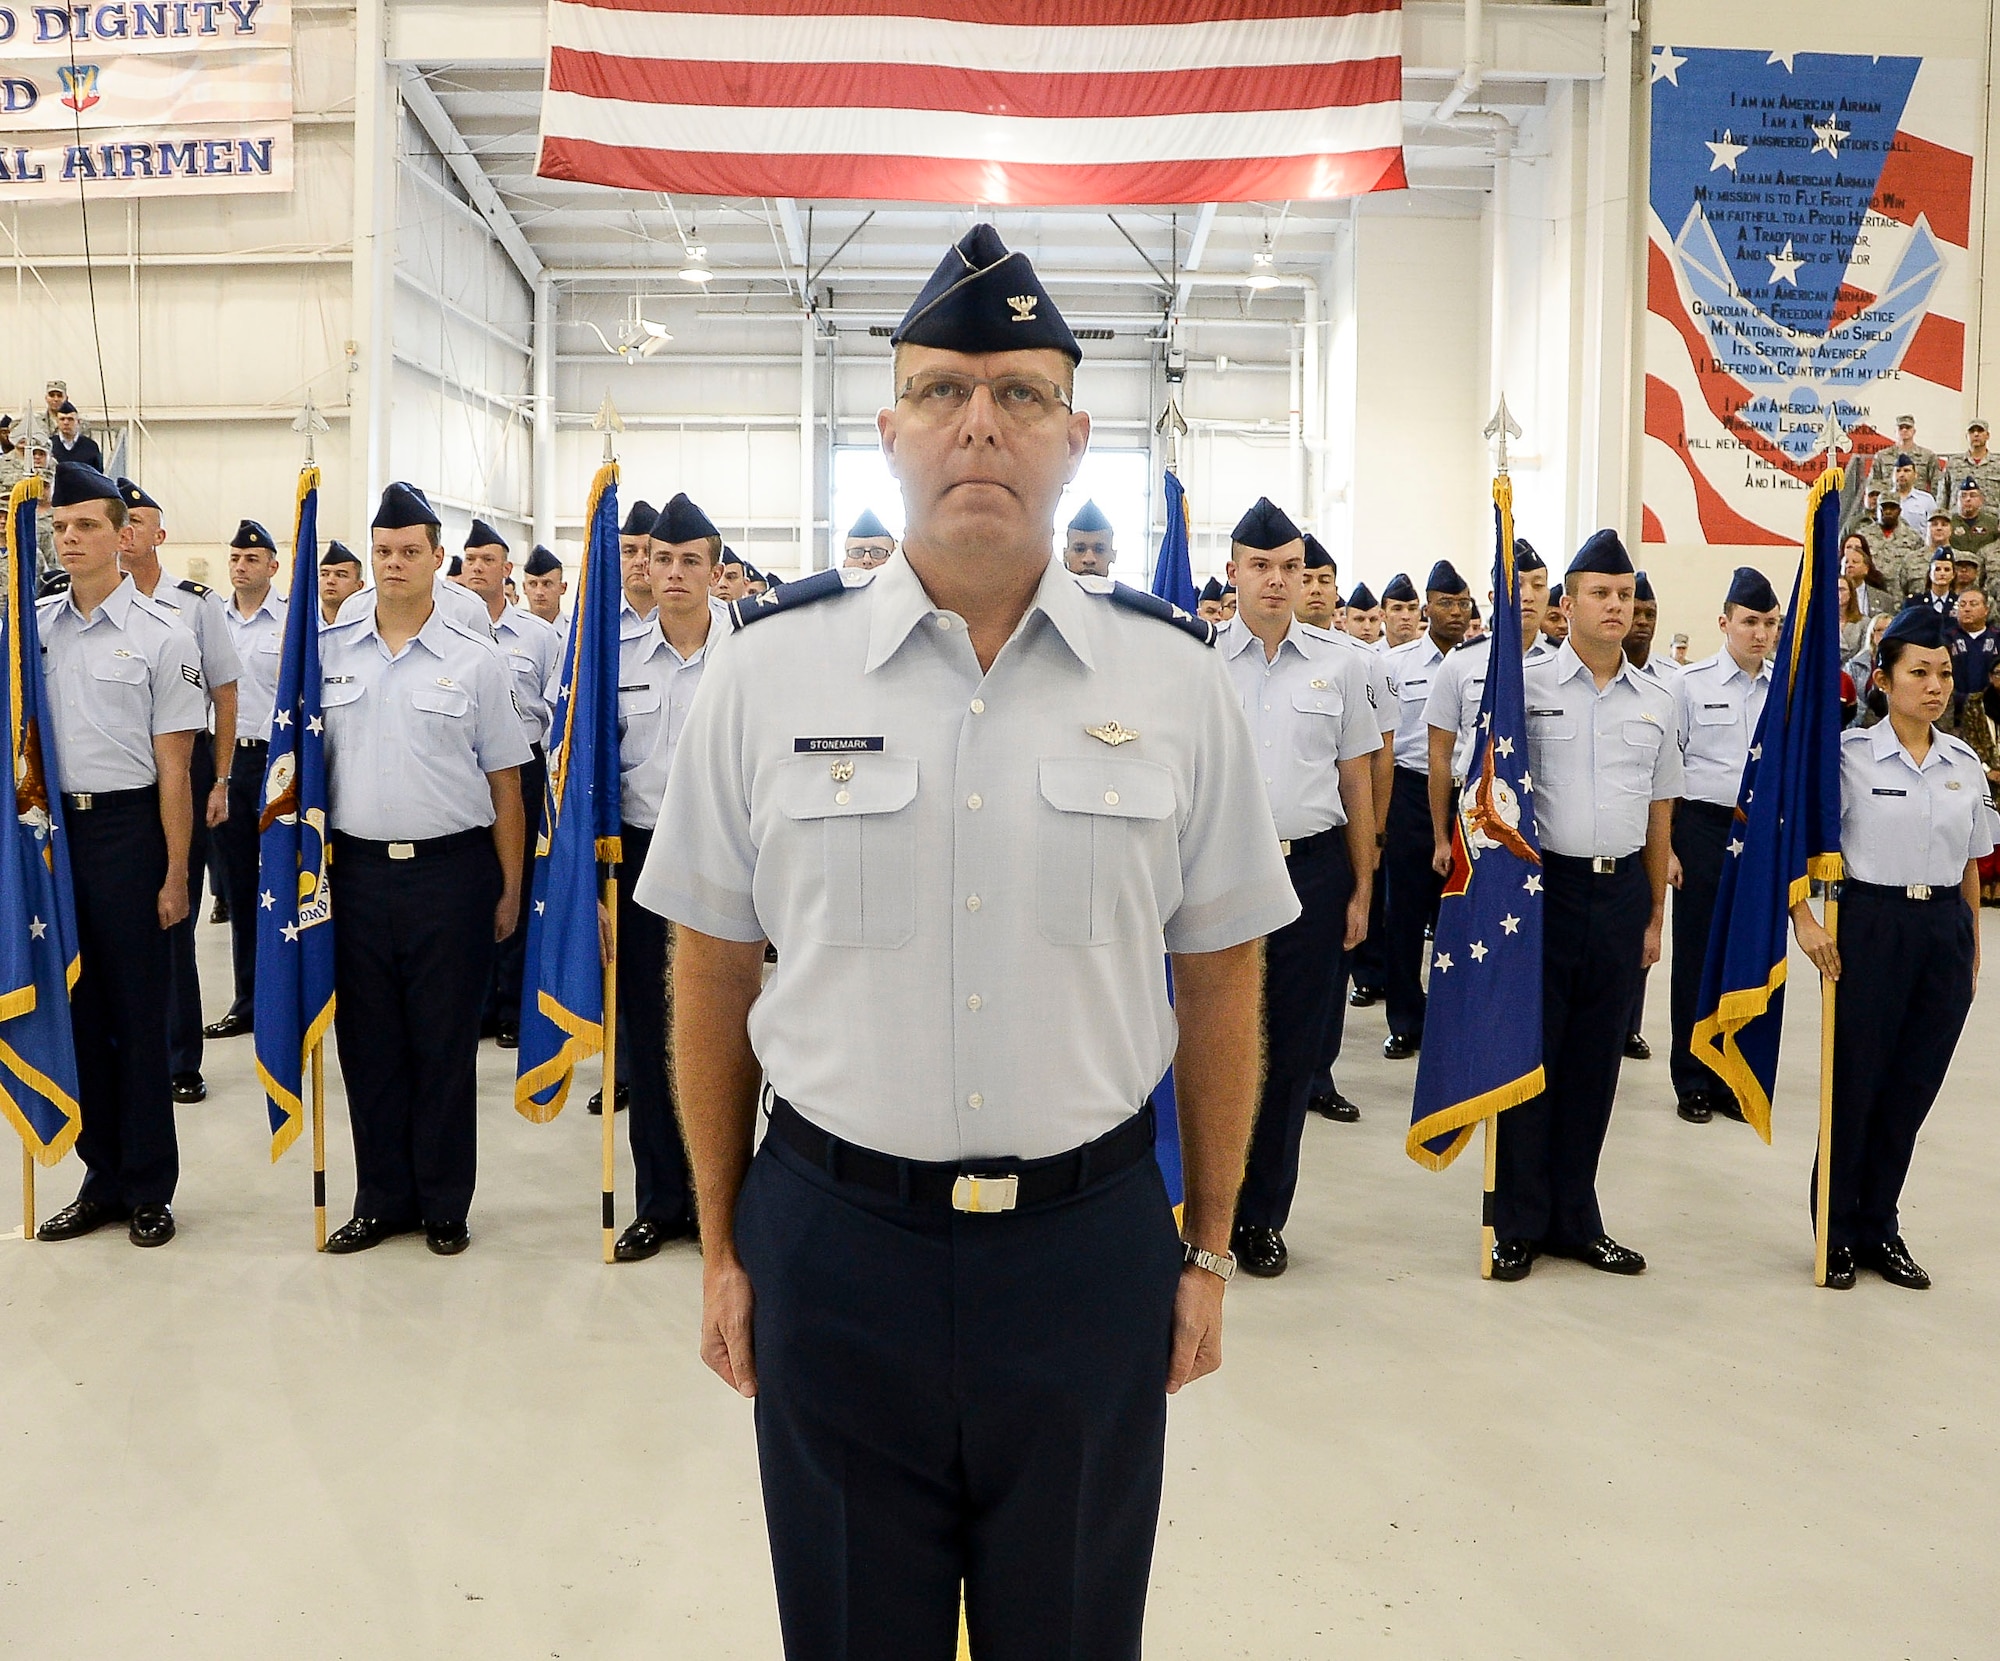 Airmen assigned to 12th Air Force (Air Forces Southern) stand at the position of attention while awaiting the arrival of the official party during the 12th Air Force (Air Forces Southern) change of command ceremony on Davis-Monthan AFB, Ariz., Dec. 19, 2014. Lt. Gen. Tod Wolters relinquished command to Lt. Gen. Chris Nowland. (U.S. Air Force photo by Staff Sgt. Adam Grant/Released)